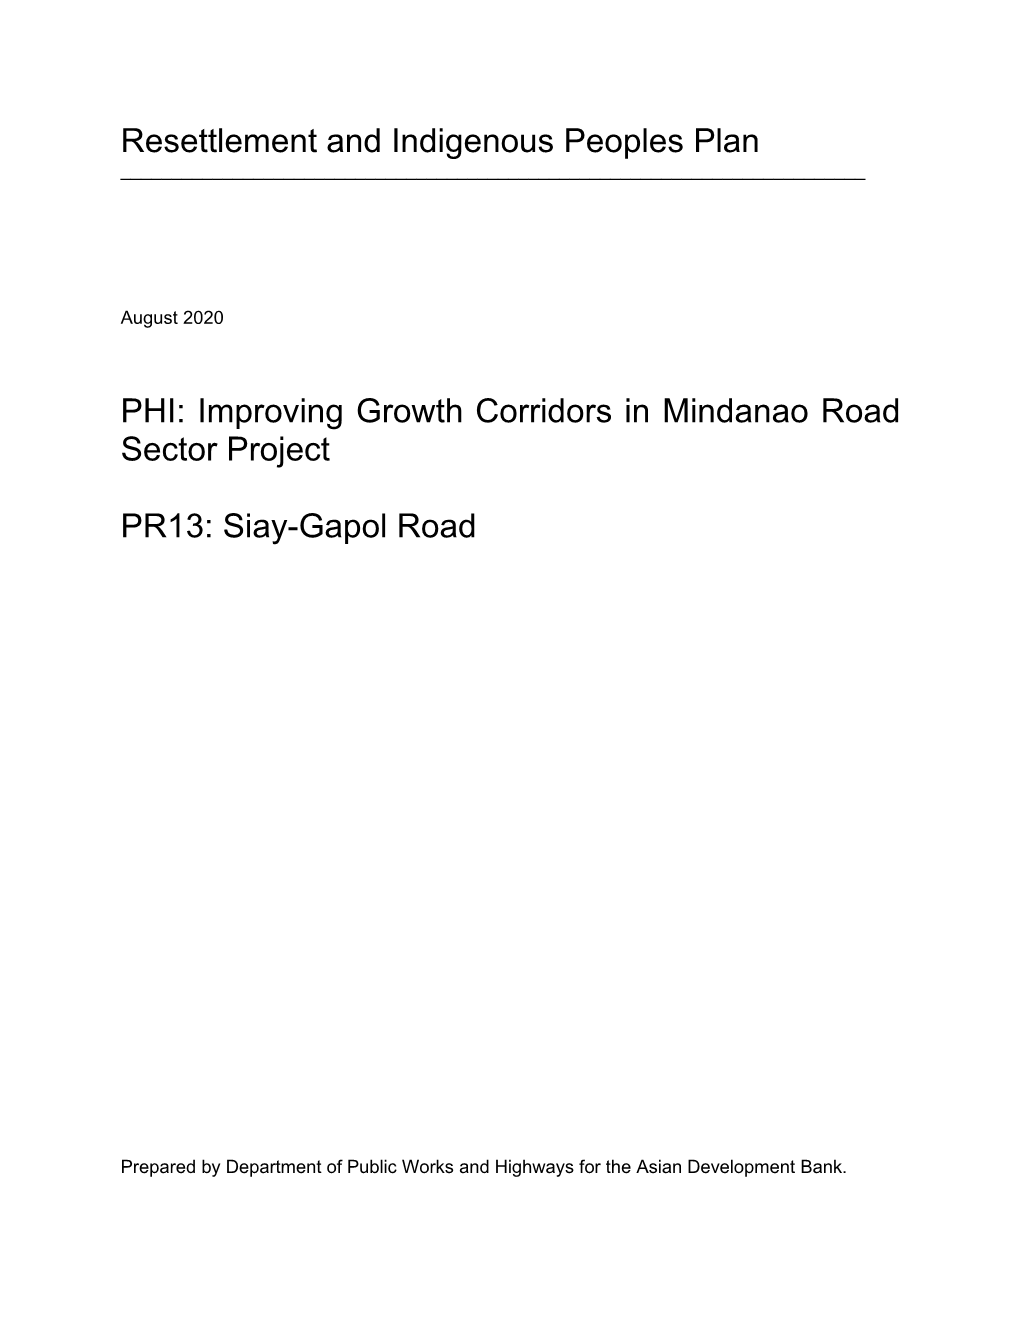 Improving Growth Corridors in Mindanao Road Sector Project PR13